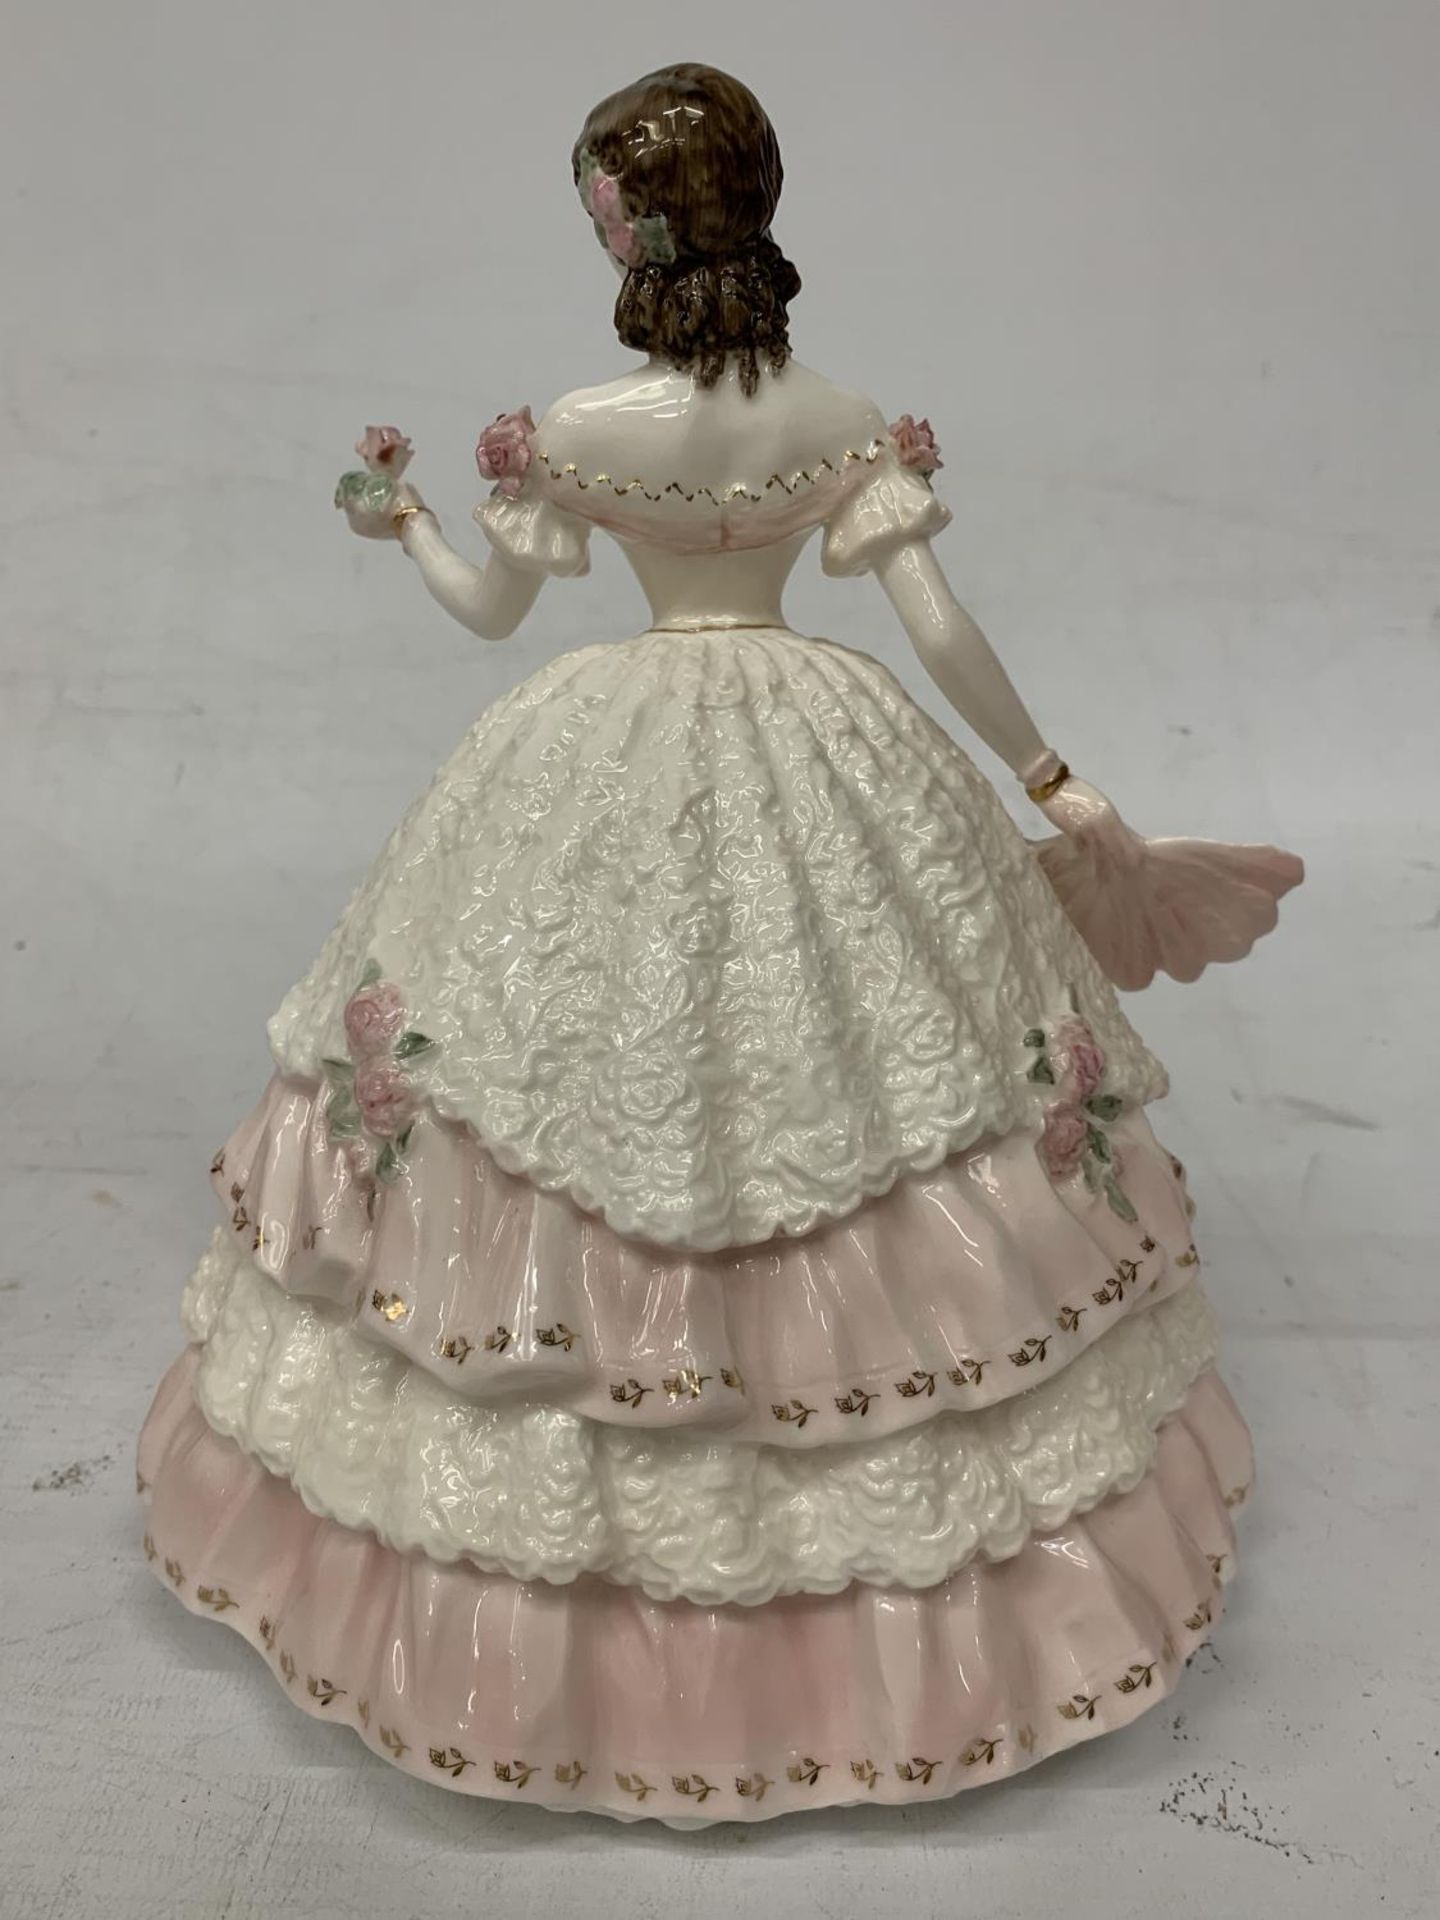 A COALPORT FIGURINE "OLIVIA" COALPORT HEIRLOOM FIGURINE OF THE YEAR 1997 ISSUED STRICTLY TO 1997 - Image 3 of 5